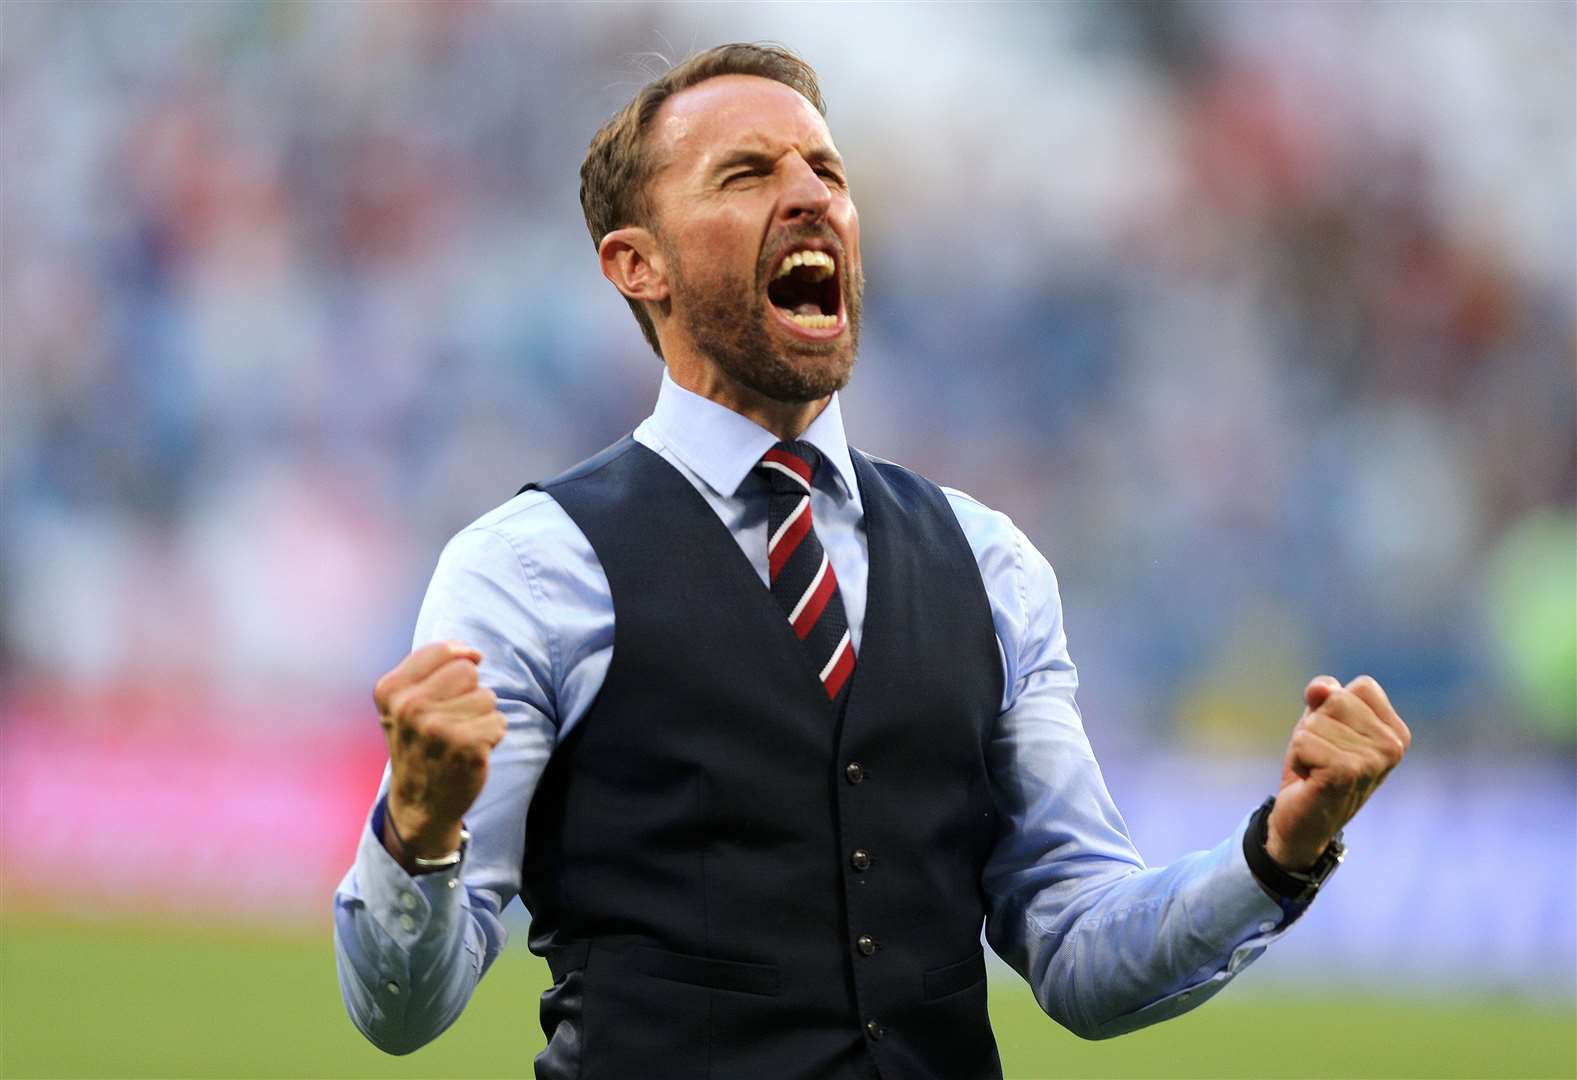 England manager Gareth Southgate Picture: PA WIRE